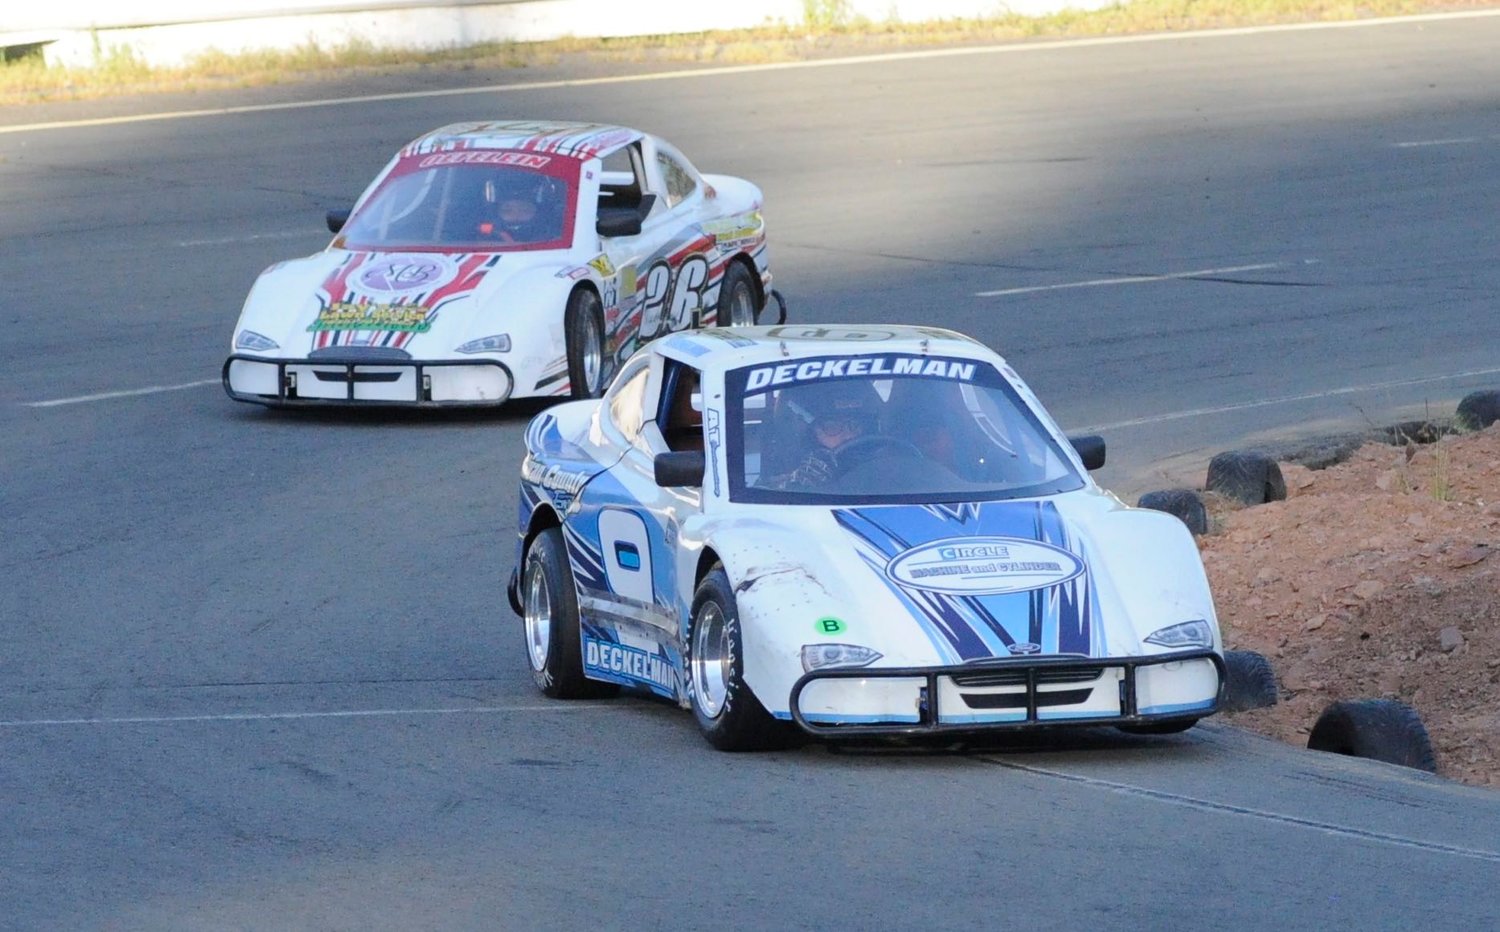 In the lead. Monika Deckelman holds off 12-year-old Leland Oefelein-Brush in car #26 during a series of practice laps.